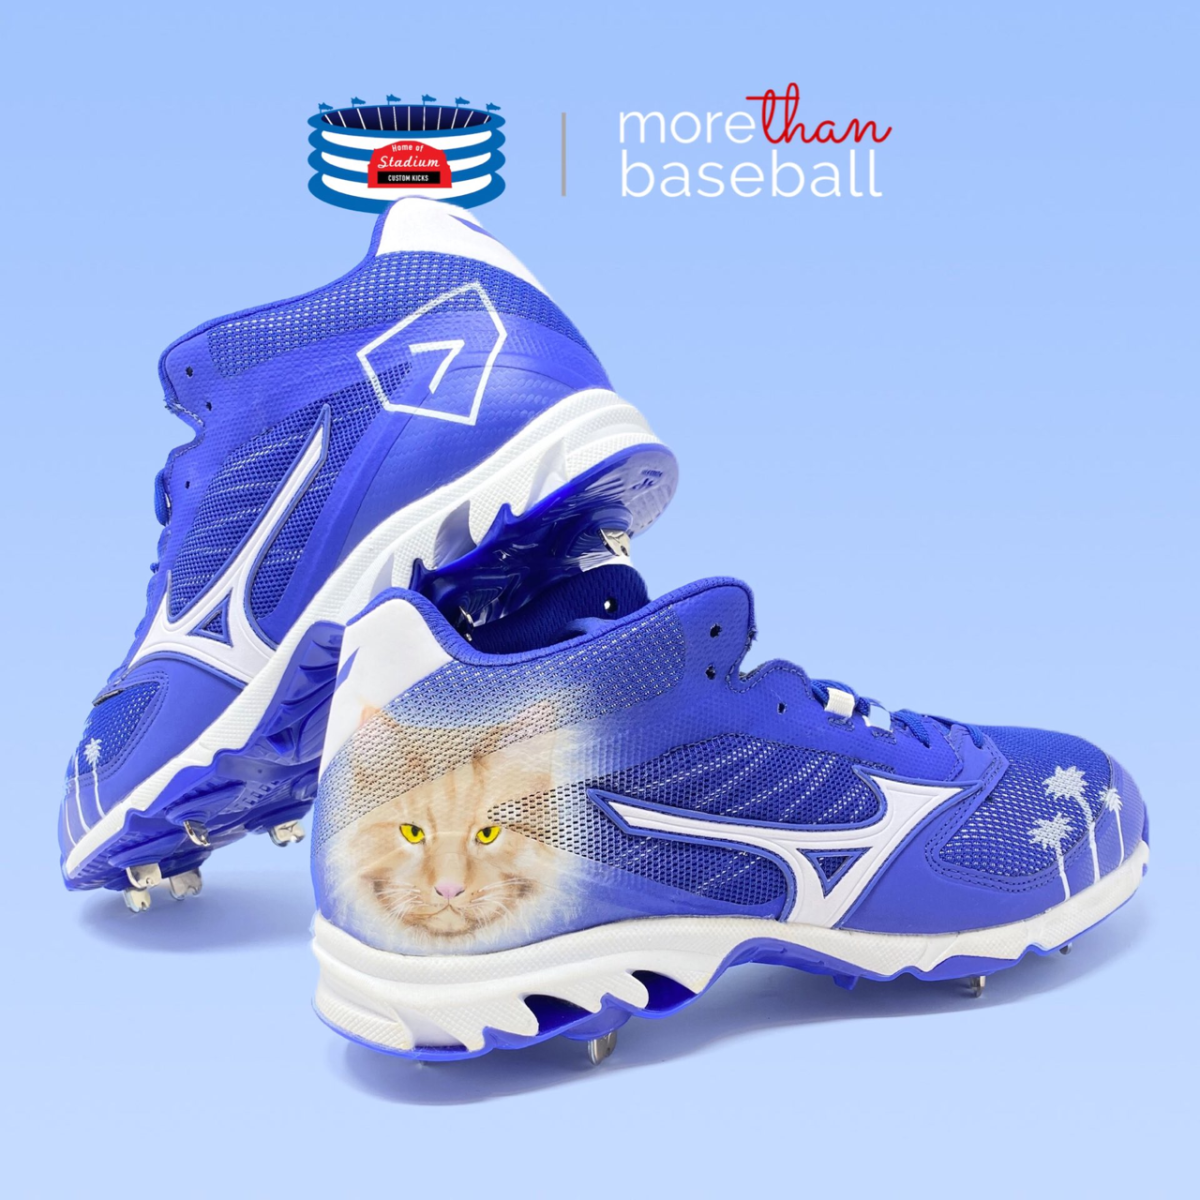 Tony Gonsolin wears cat cleats in NLCS Game 1